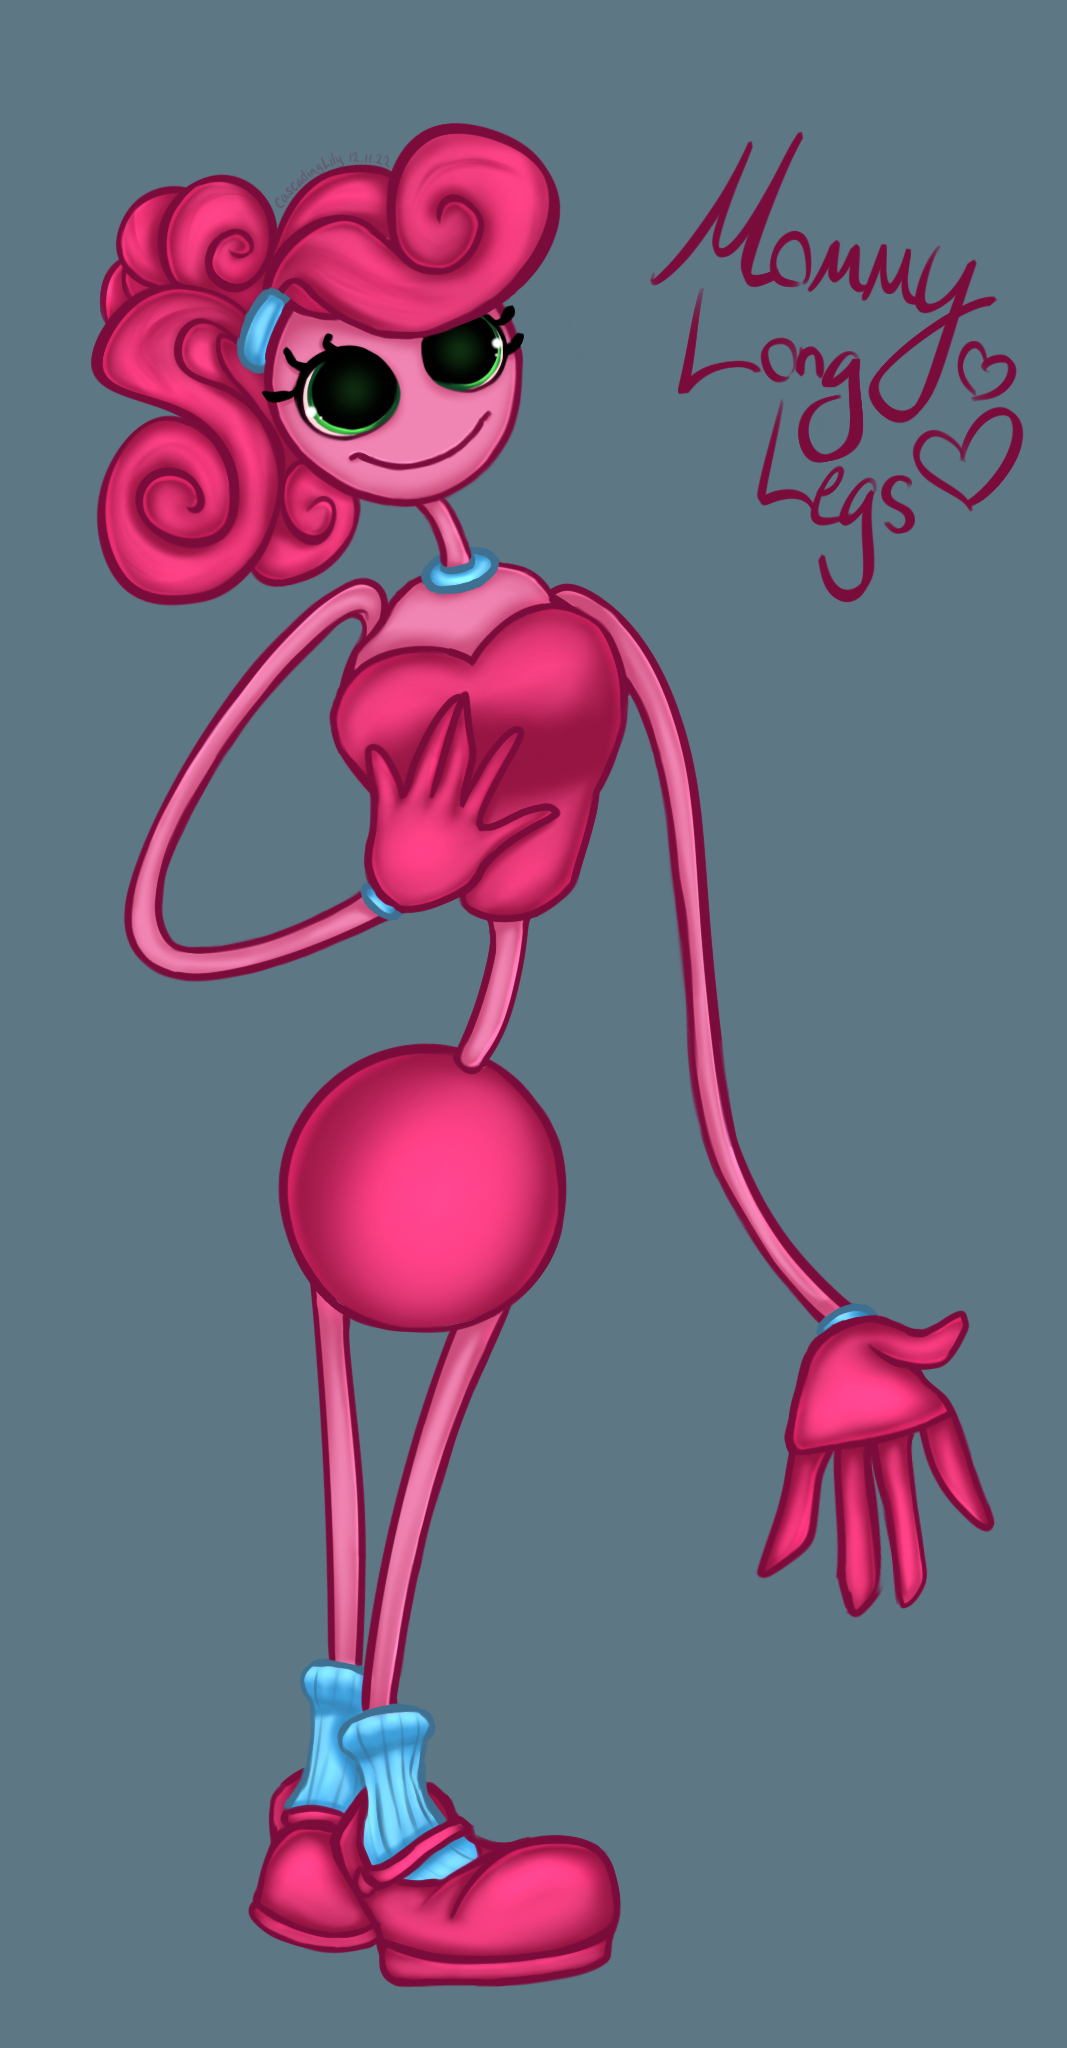 Mommy Long Legs by Teotle on DeviantArt